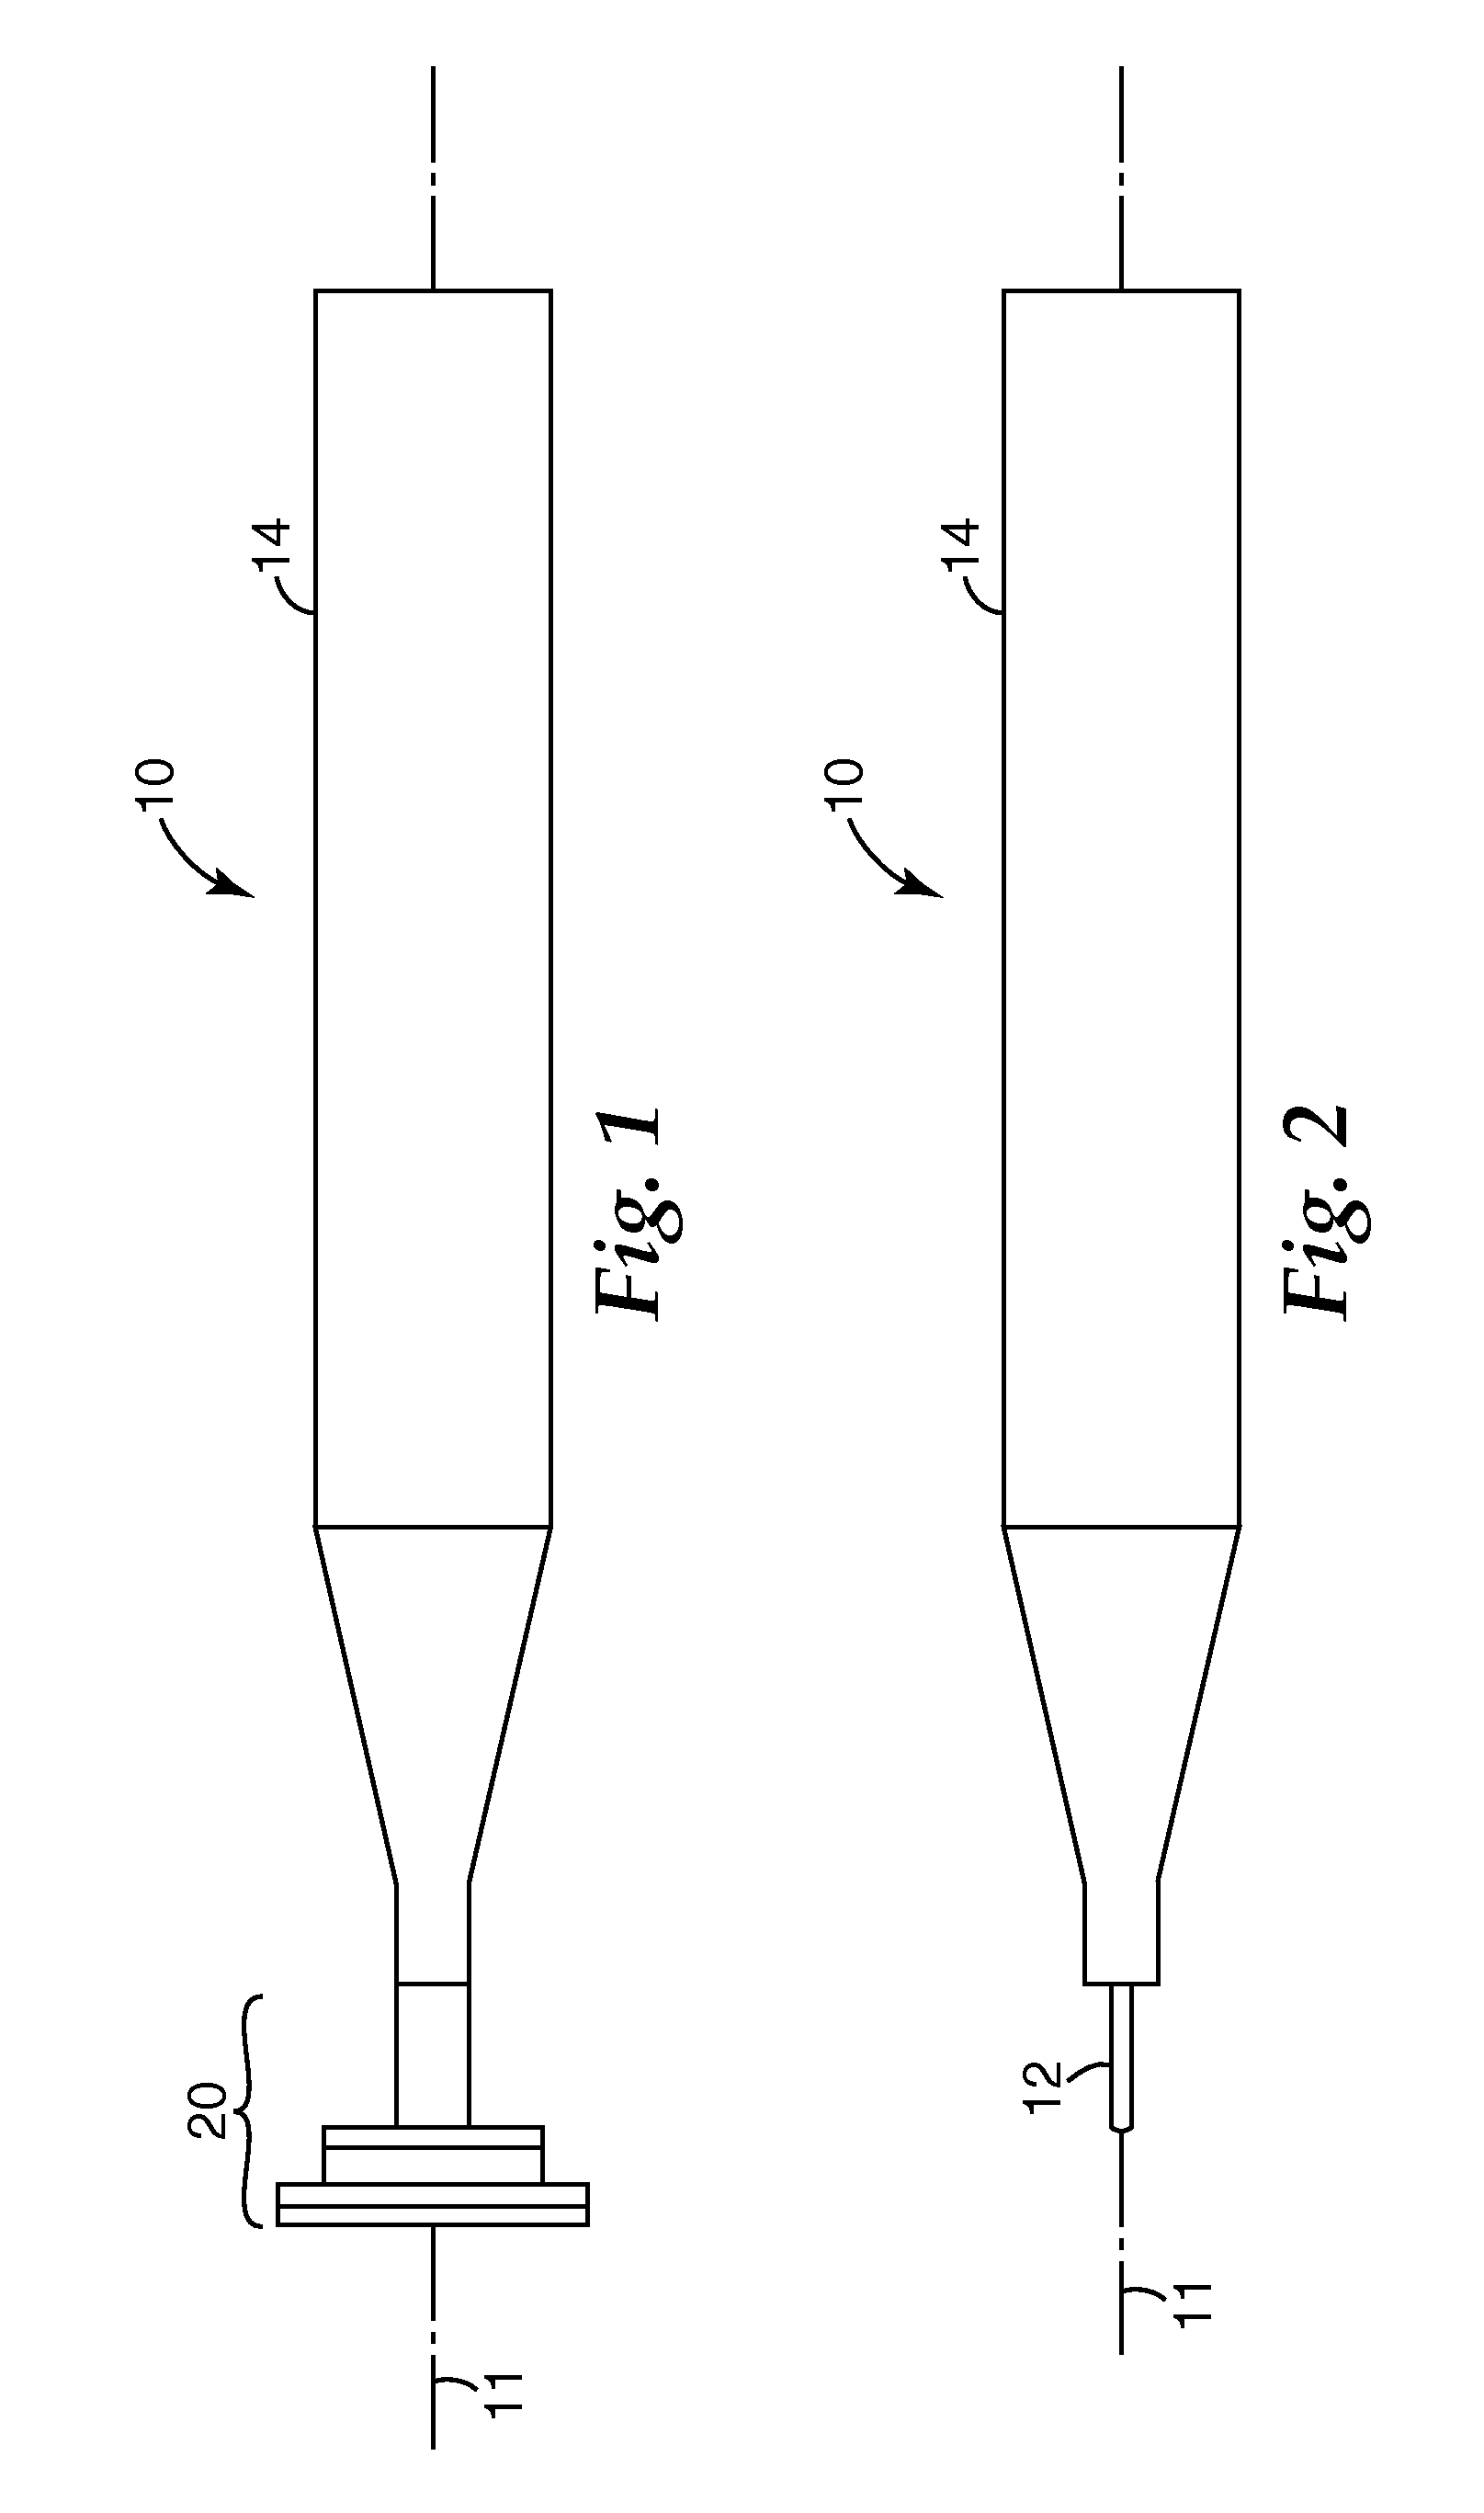 Abrasive articles, rotationally reciprocating tools, and methods